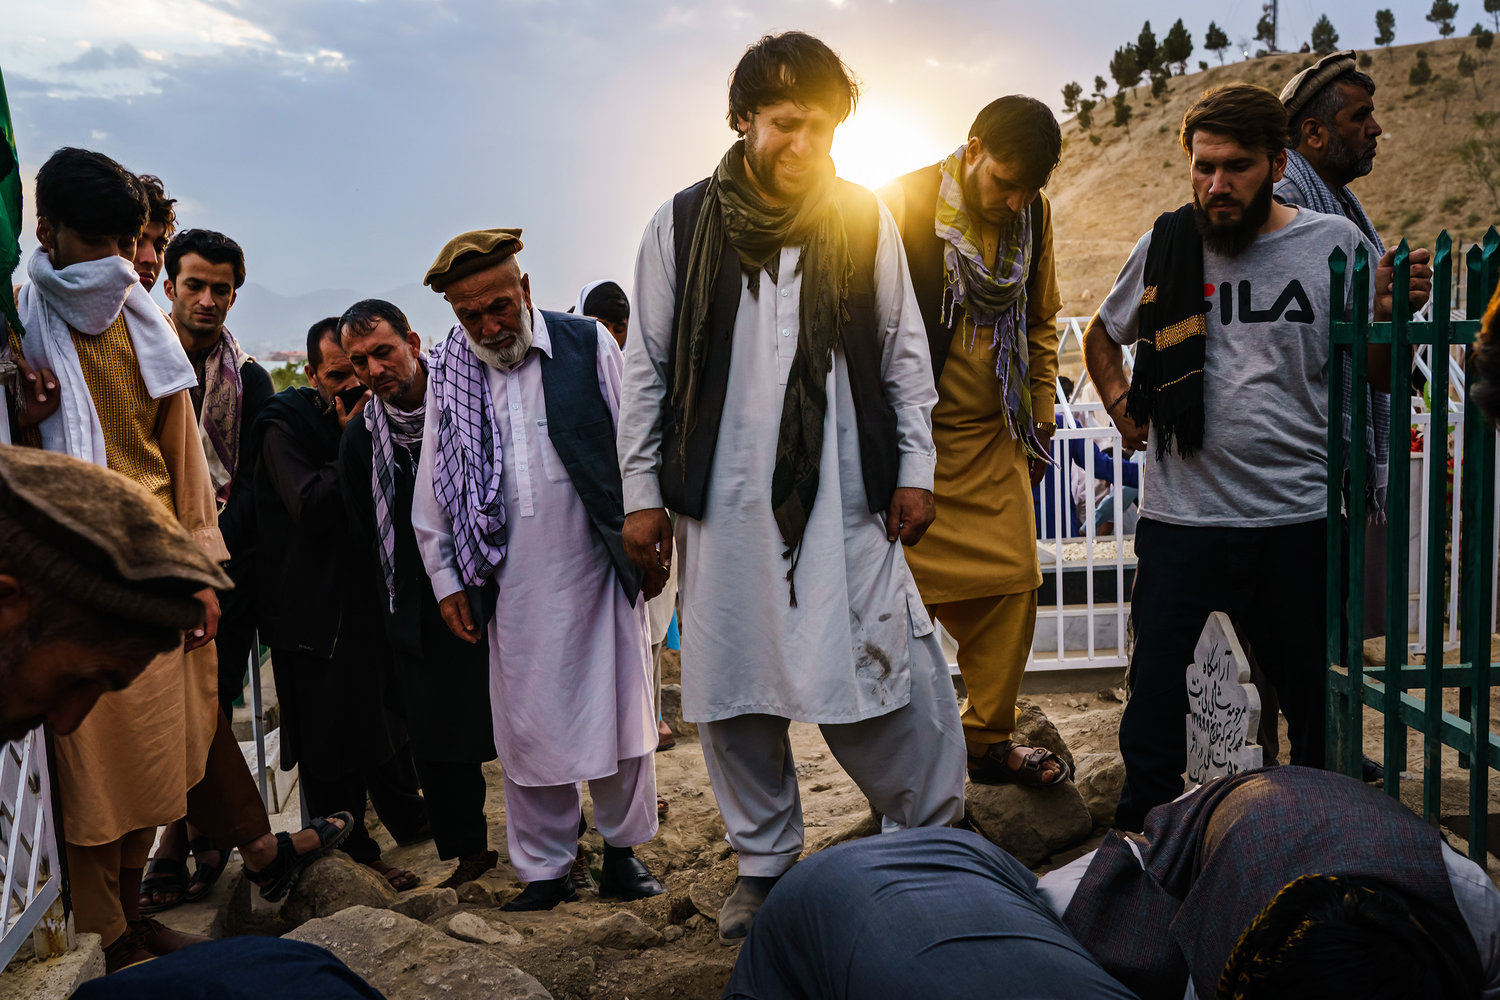 Ajmal Ahmadi grieves for his family, all 10 civilians who were killed in a U.S. drone strike in Kabul, Afghanistan. (Marcus Yam/Los Angeles Times/TNS)